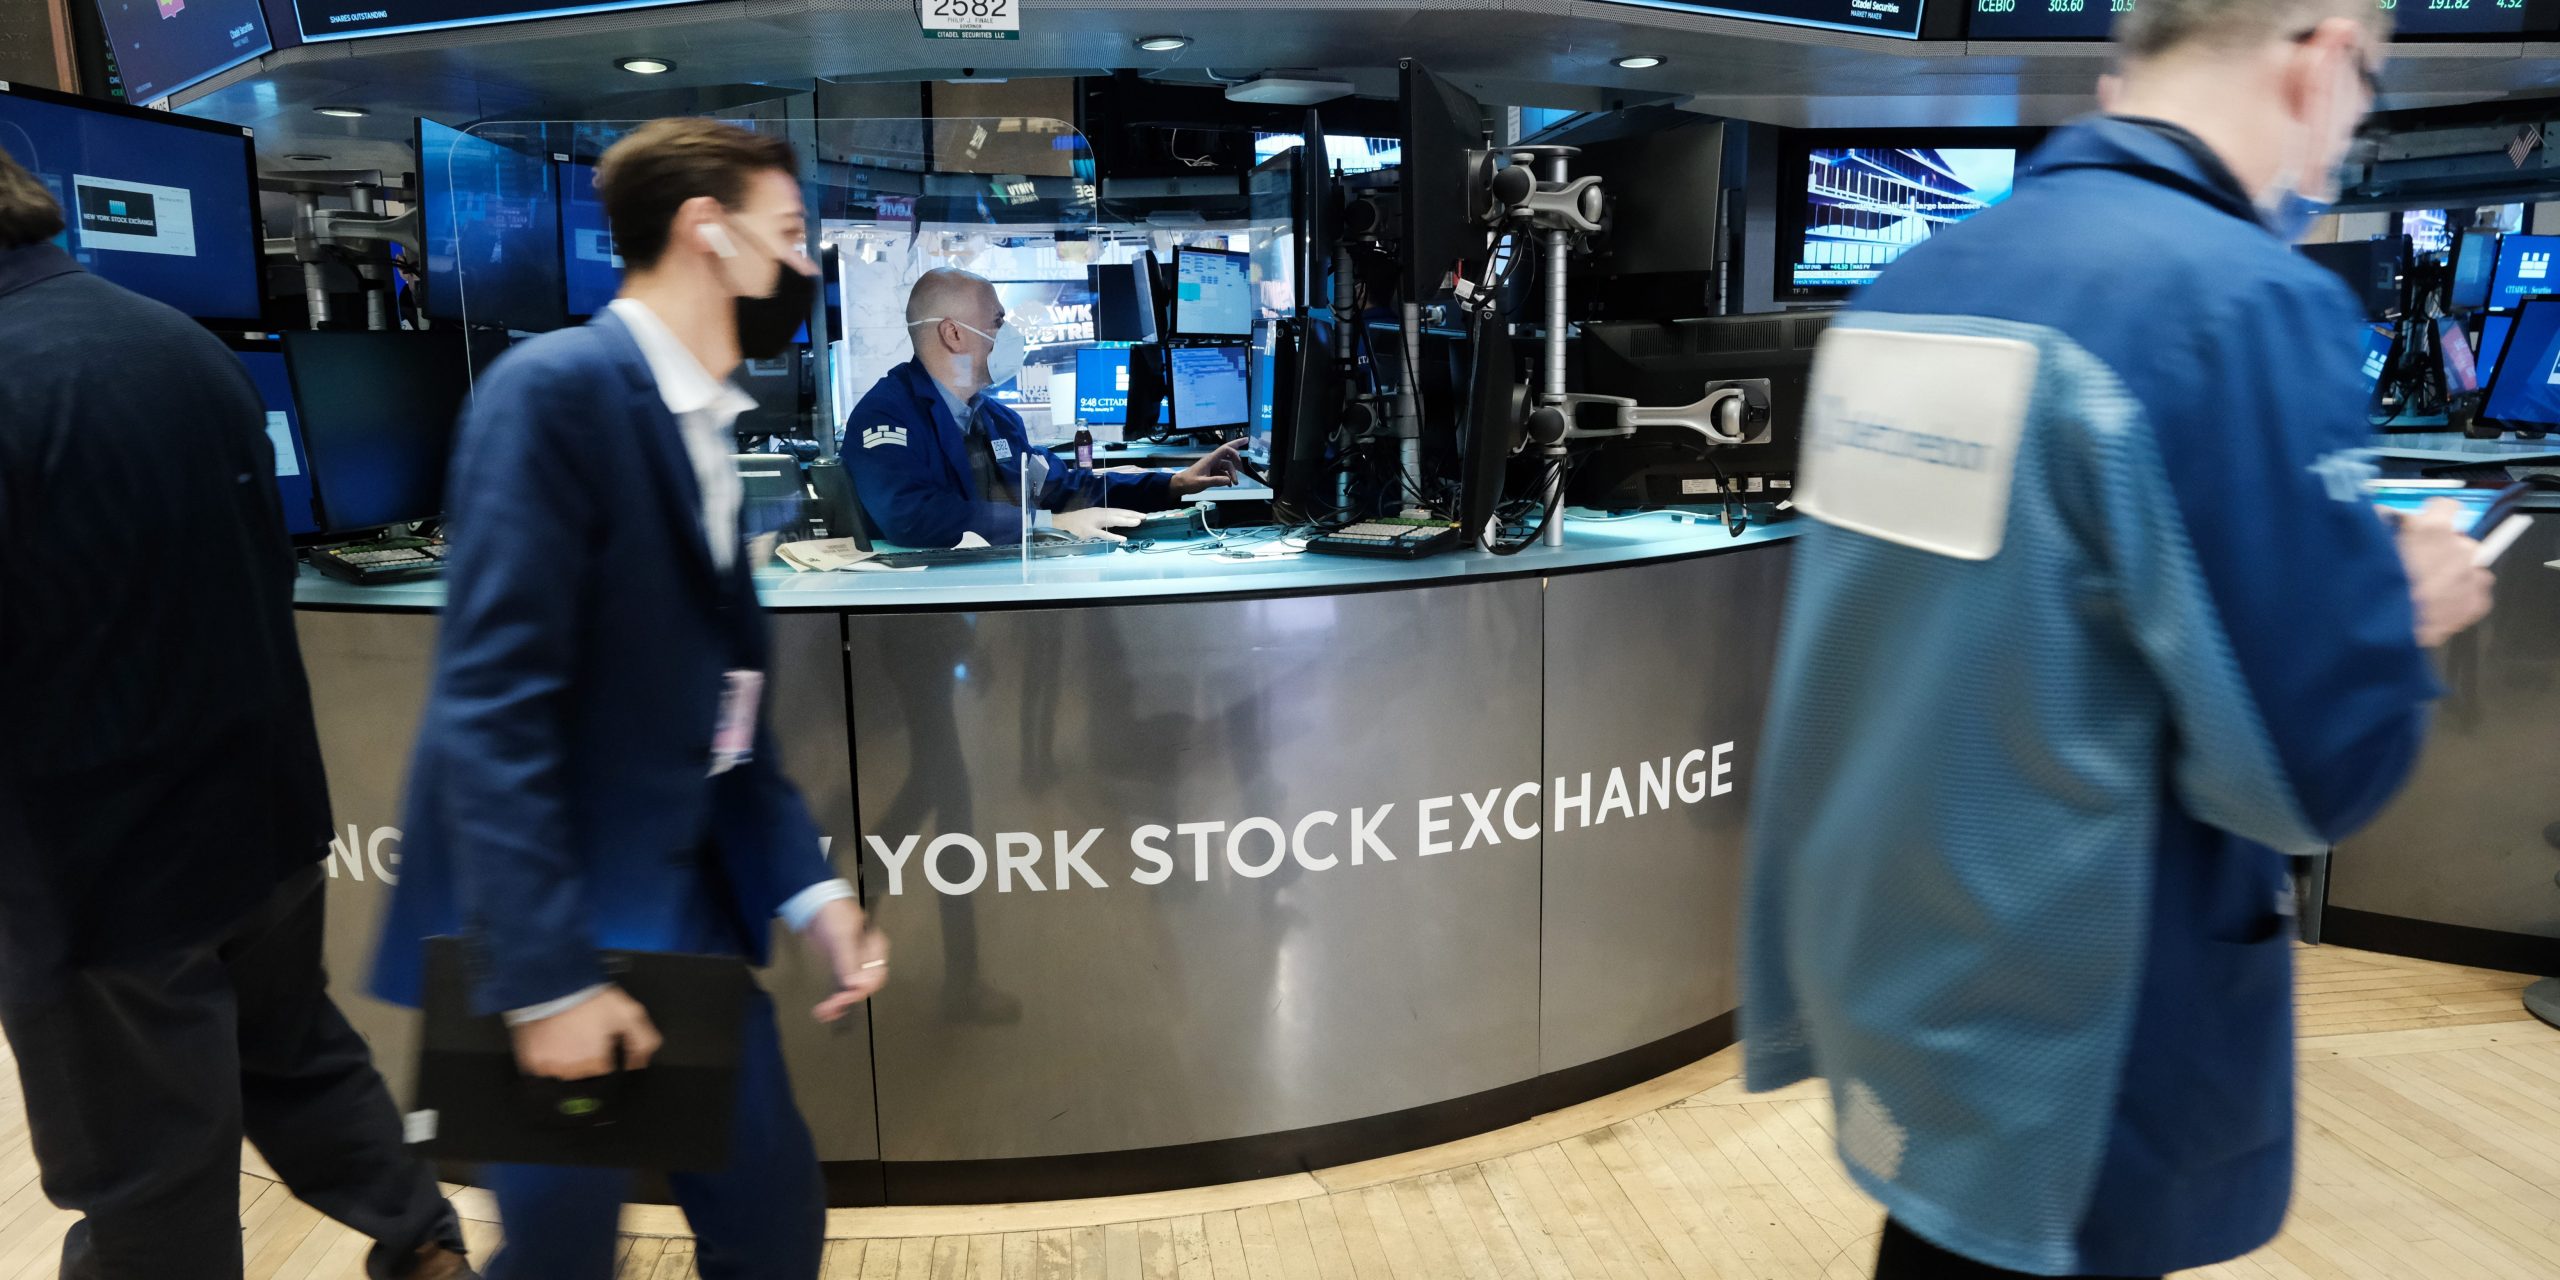 Traders work on the floor of the New York Stock Exchange (NYSE) on January 31, 2022 in New York City.